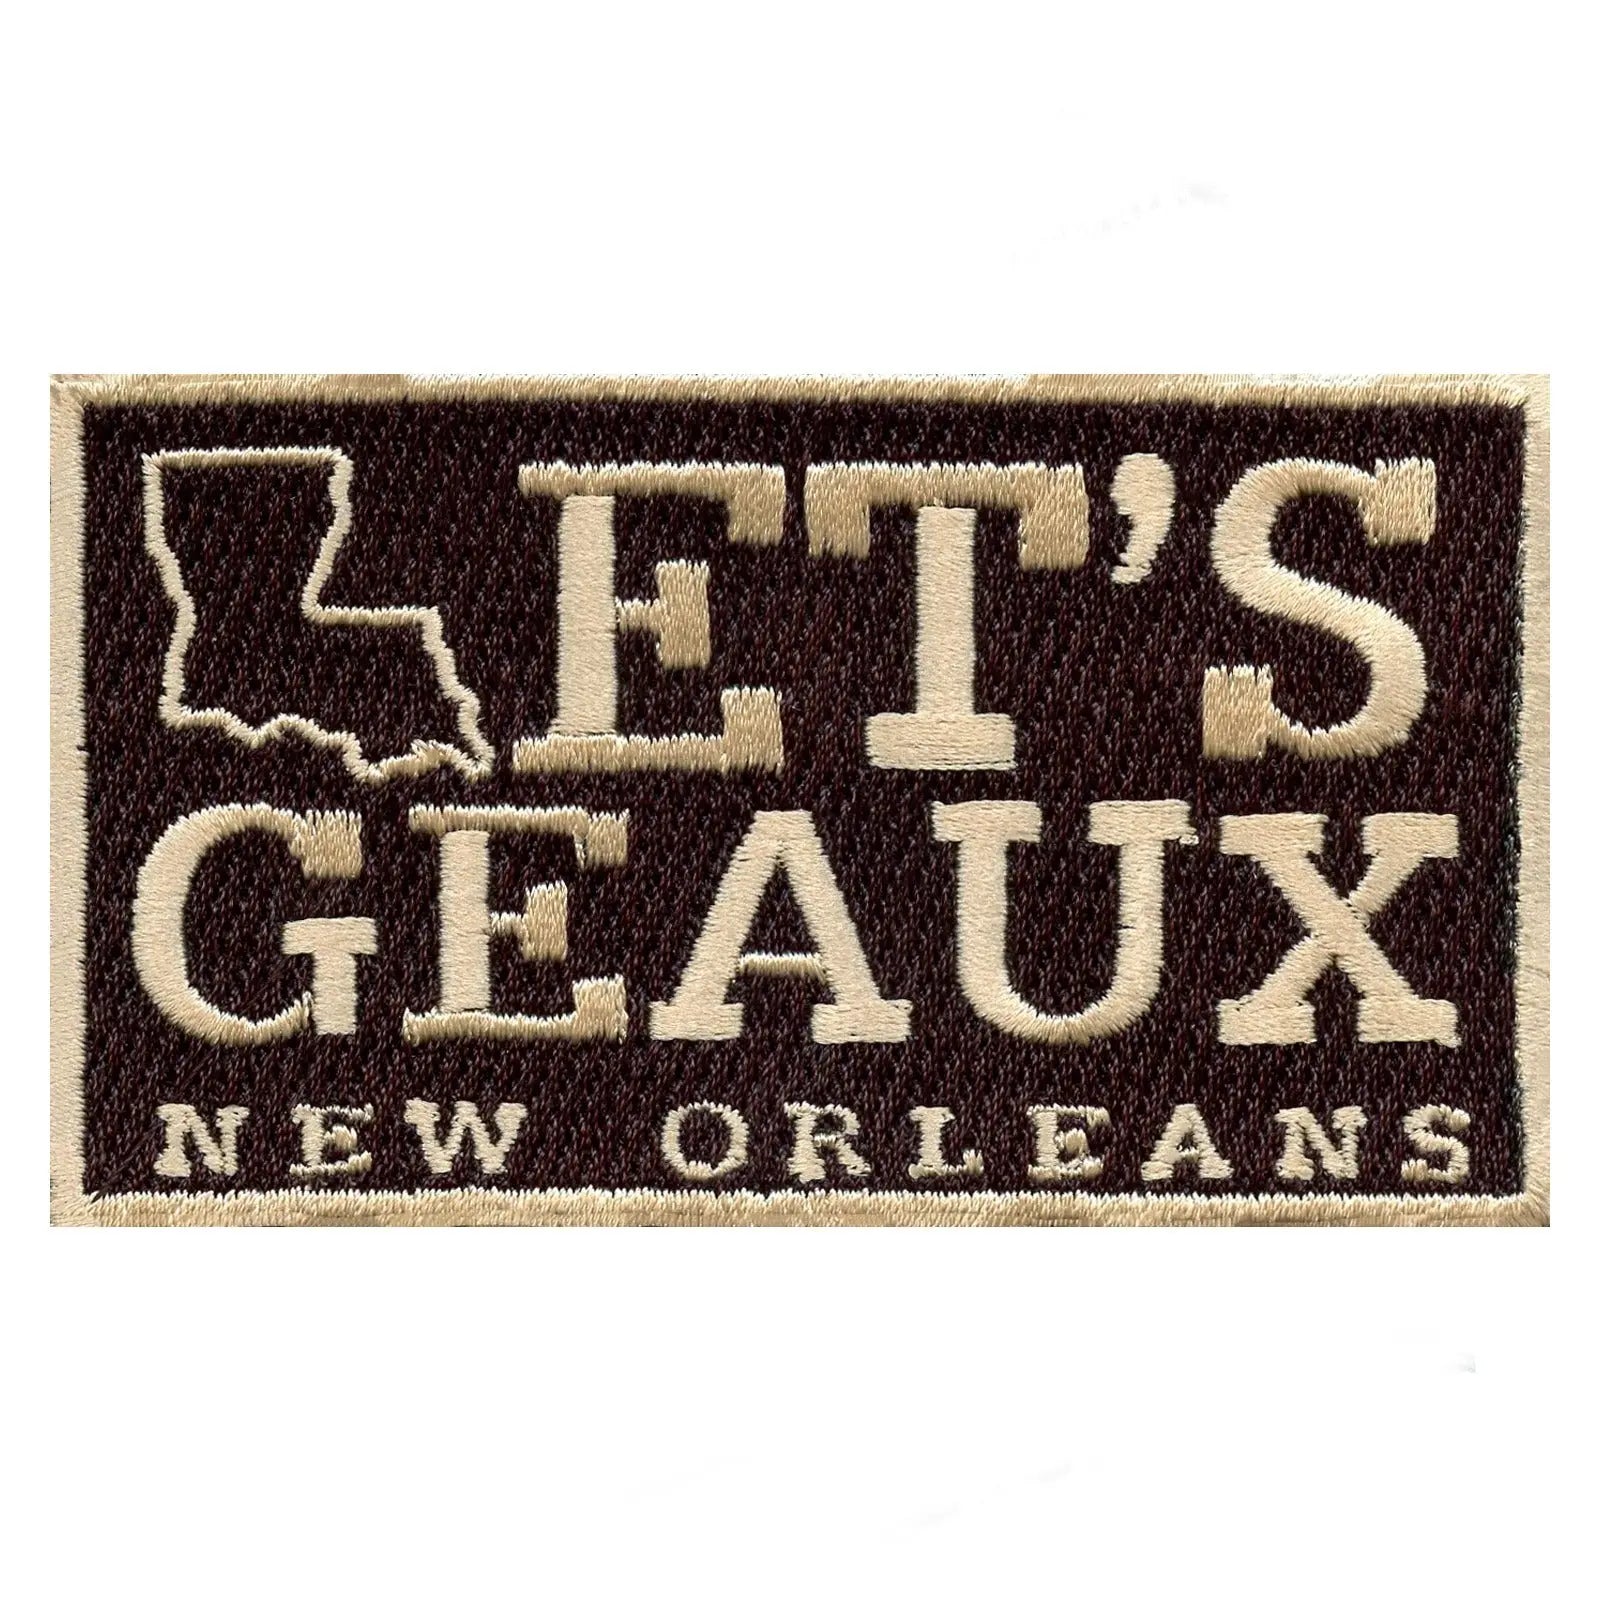 Lets Geaux New Orleans Embroidered Iron On Patch 